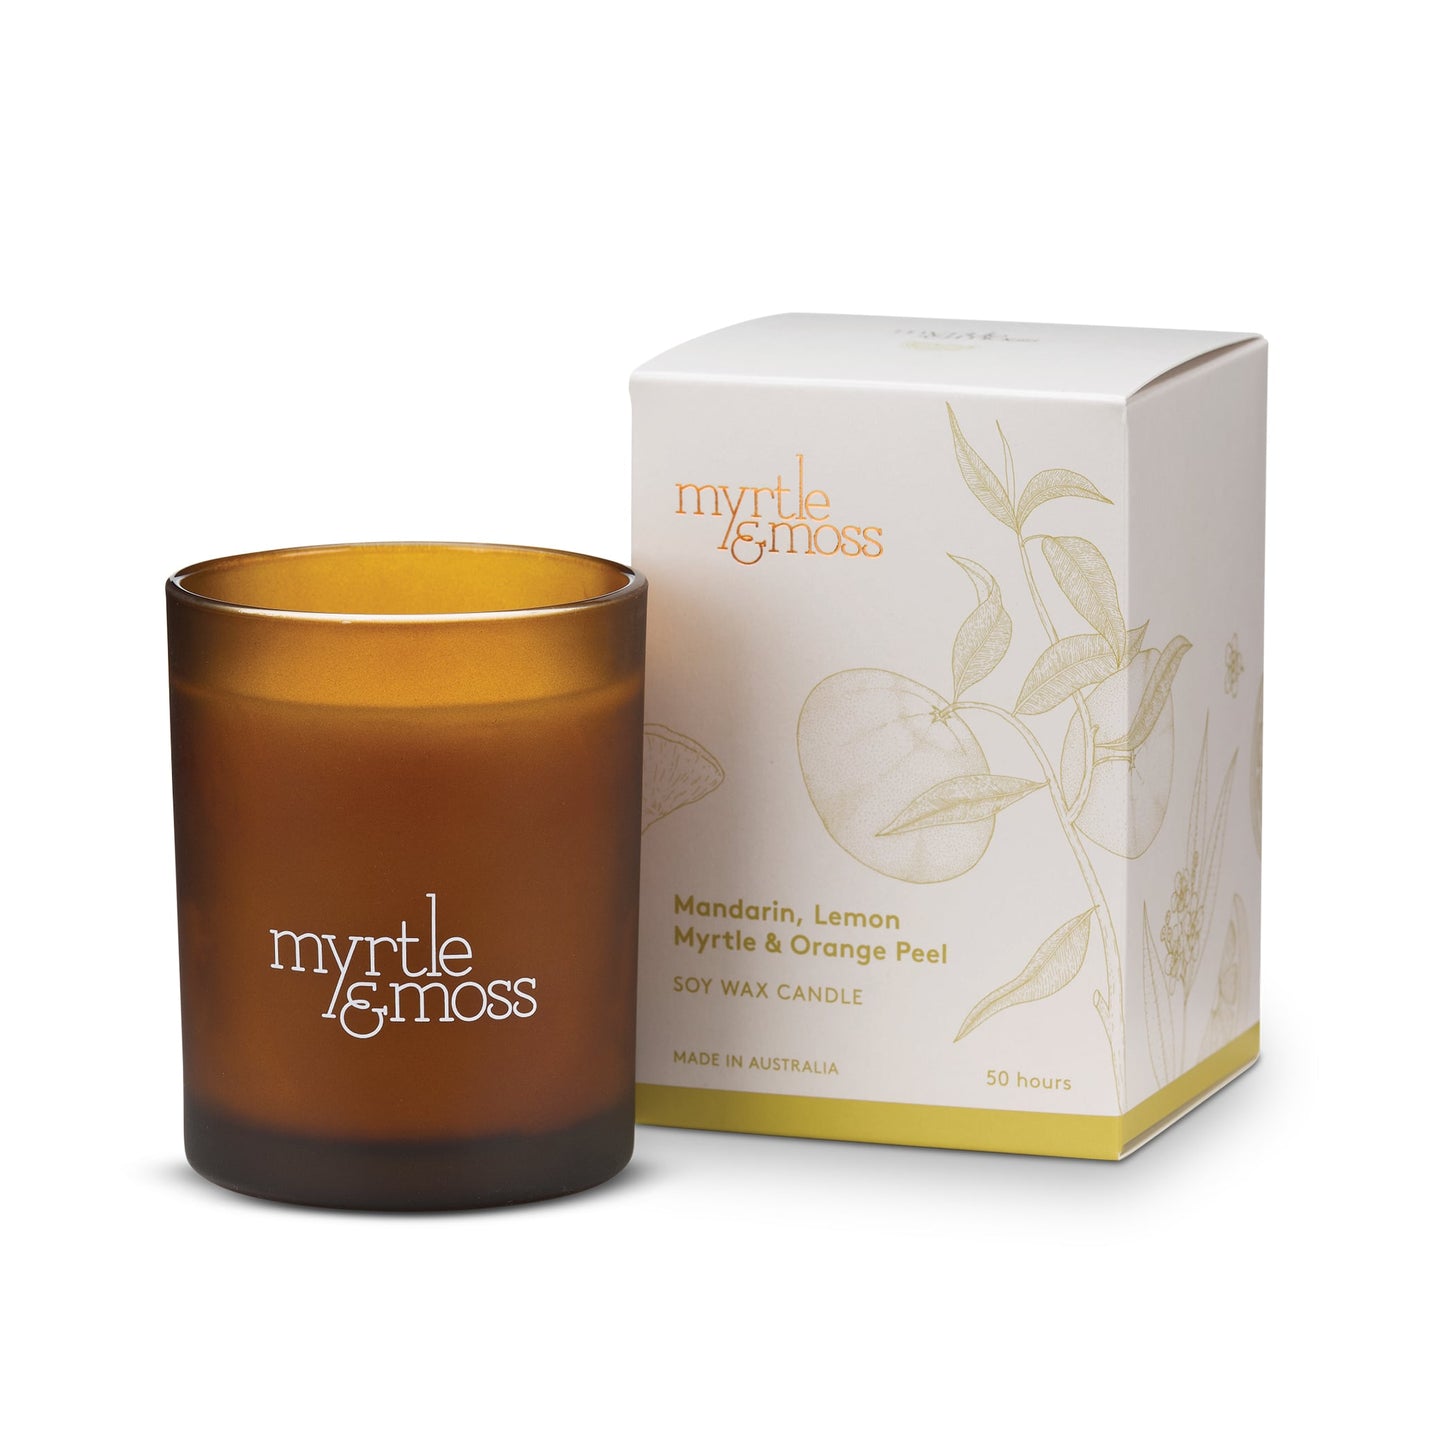 Myrtle & Moss Soy Wax Candle